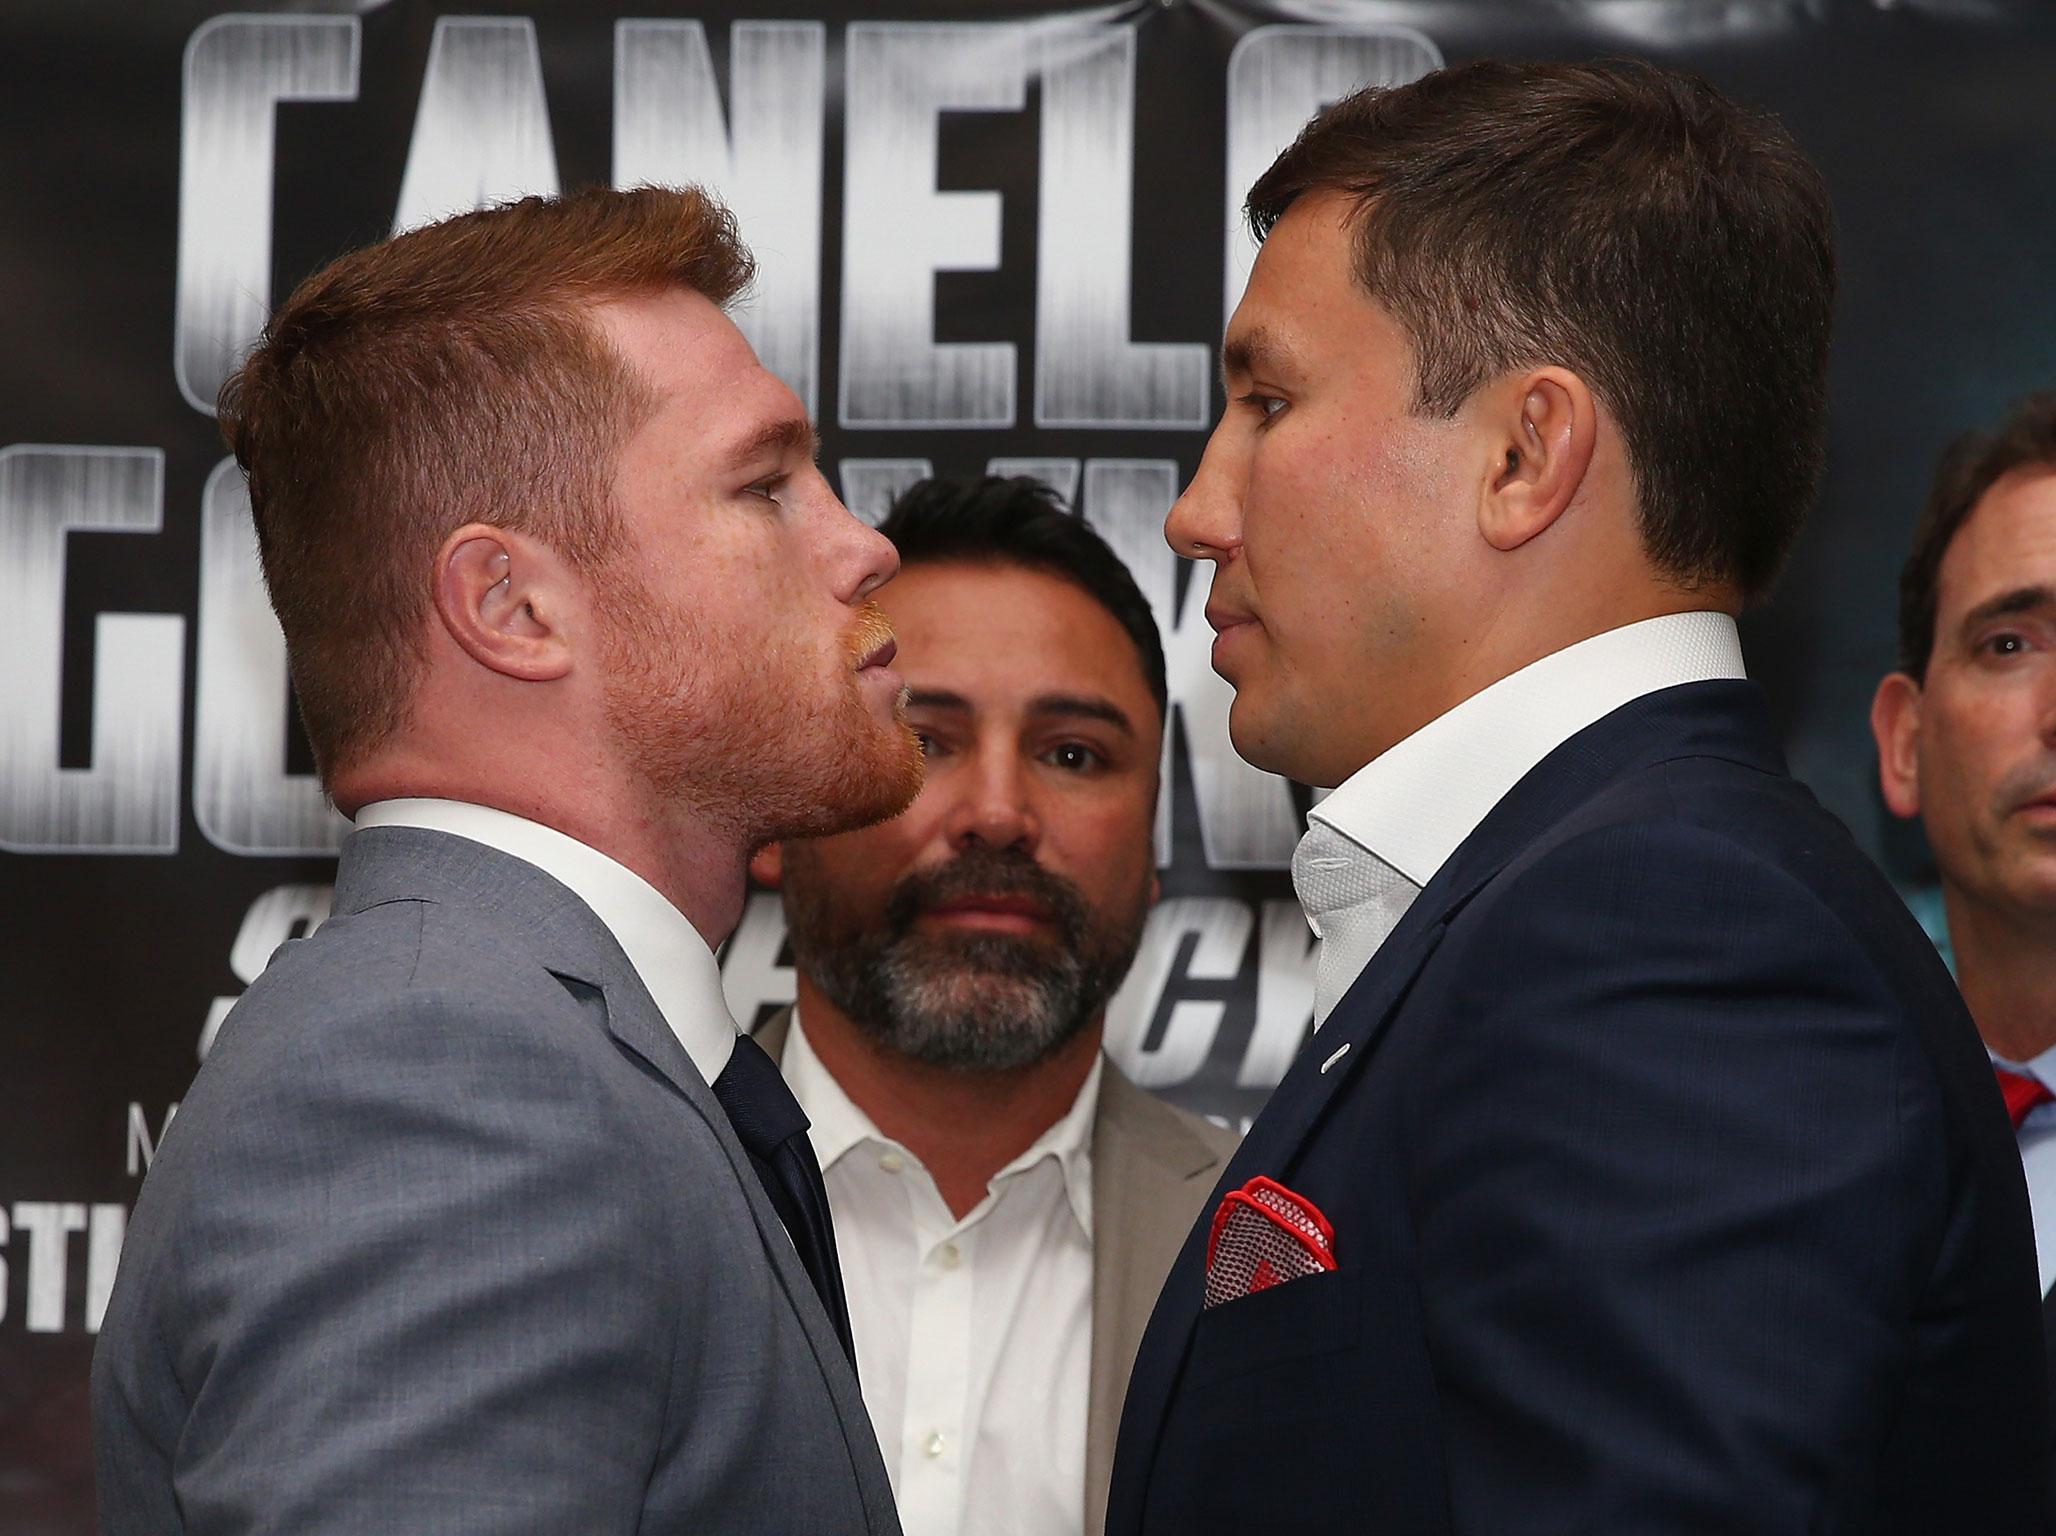 Canelo Alvarez and Gennady Golvkin will face off this weekend in what should be a classic